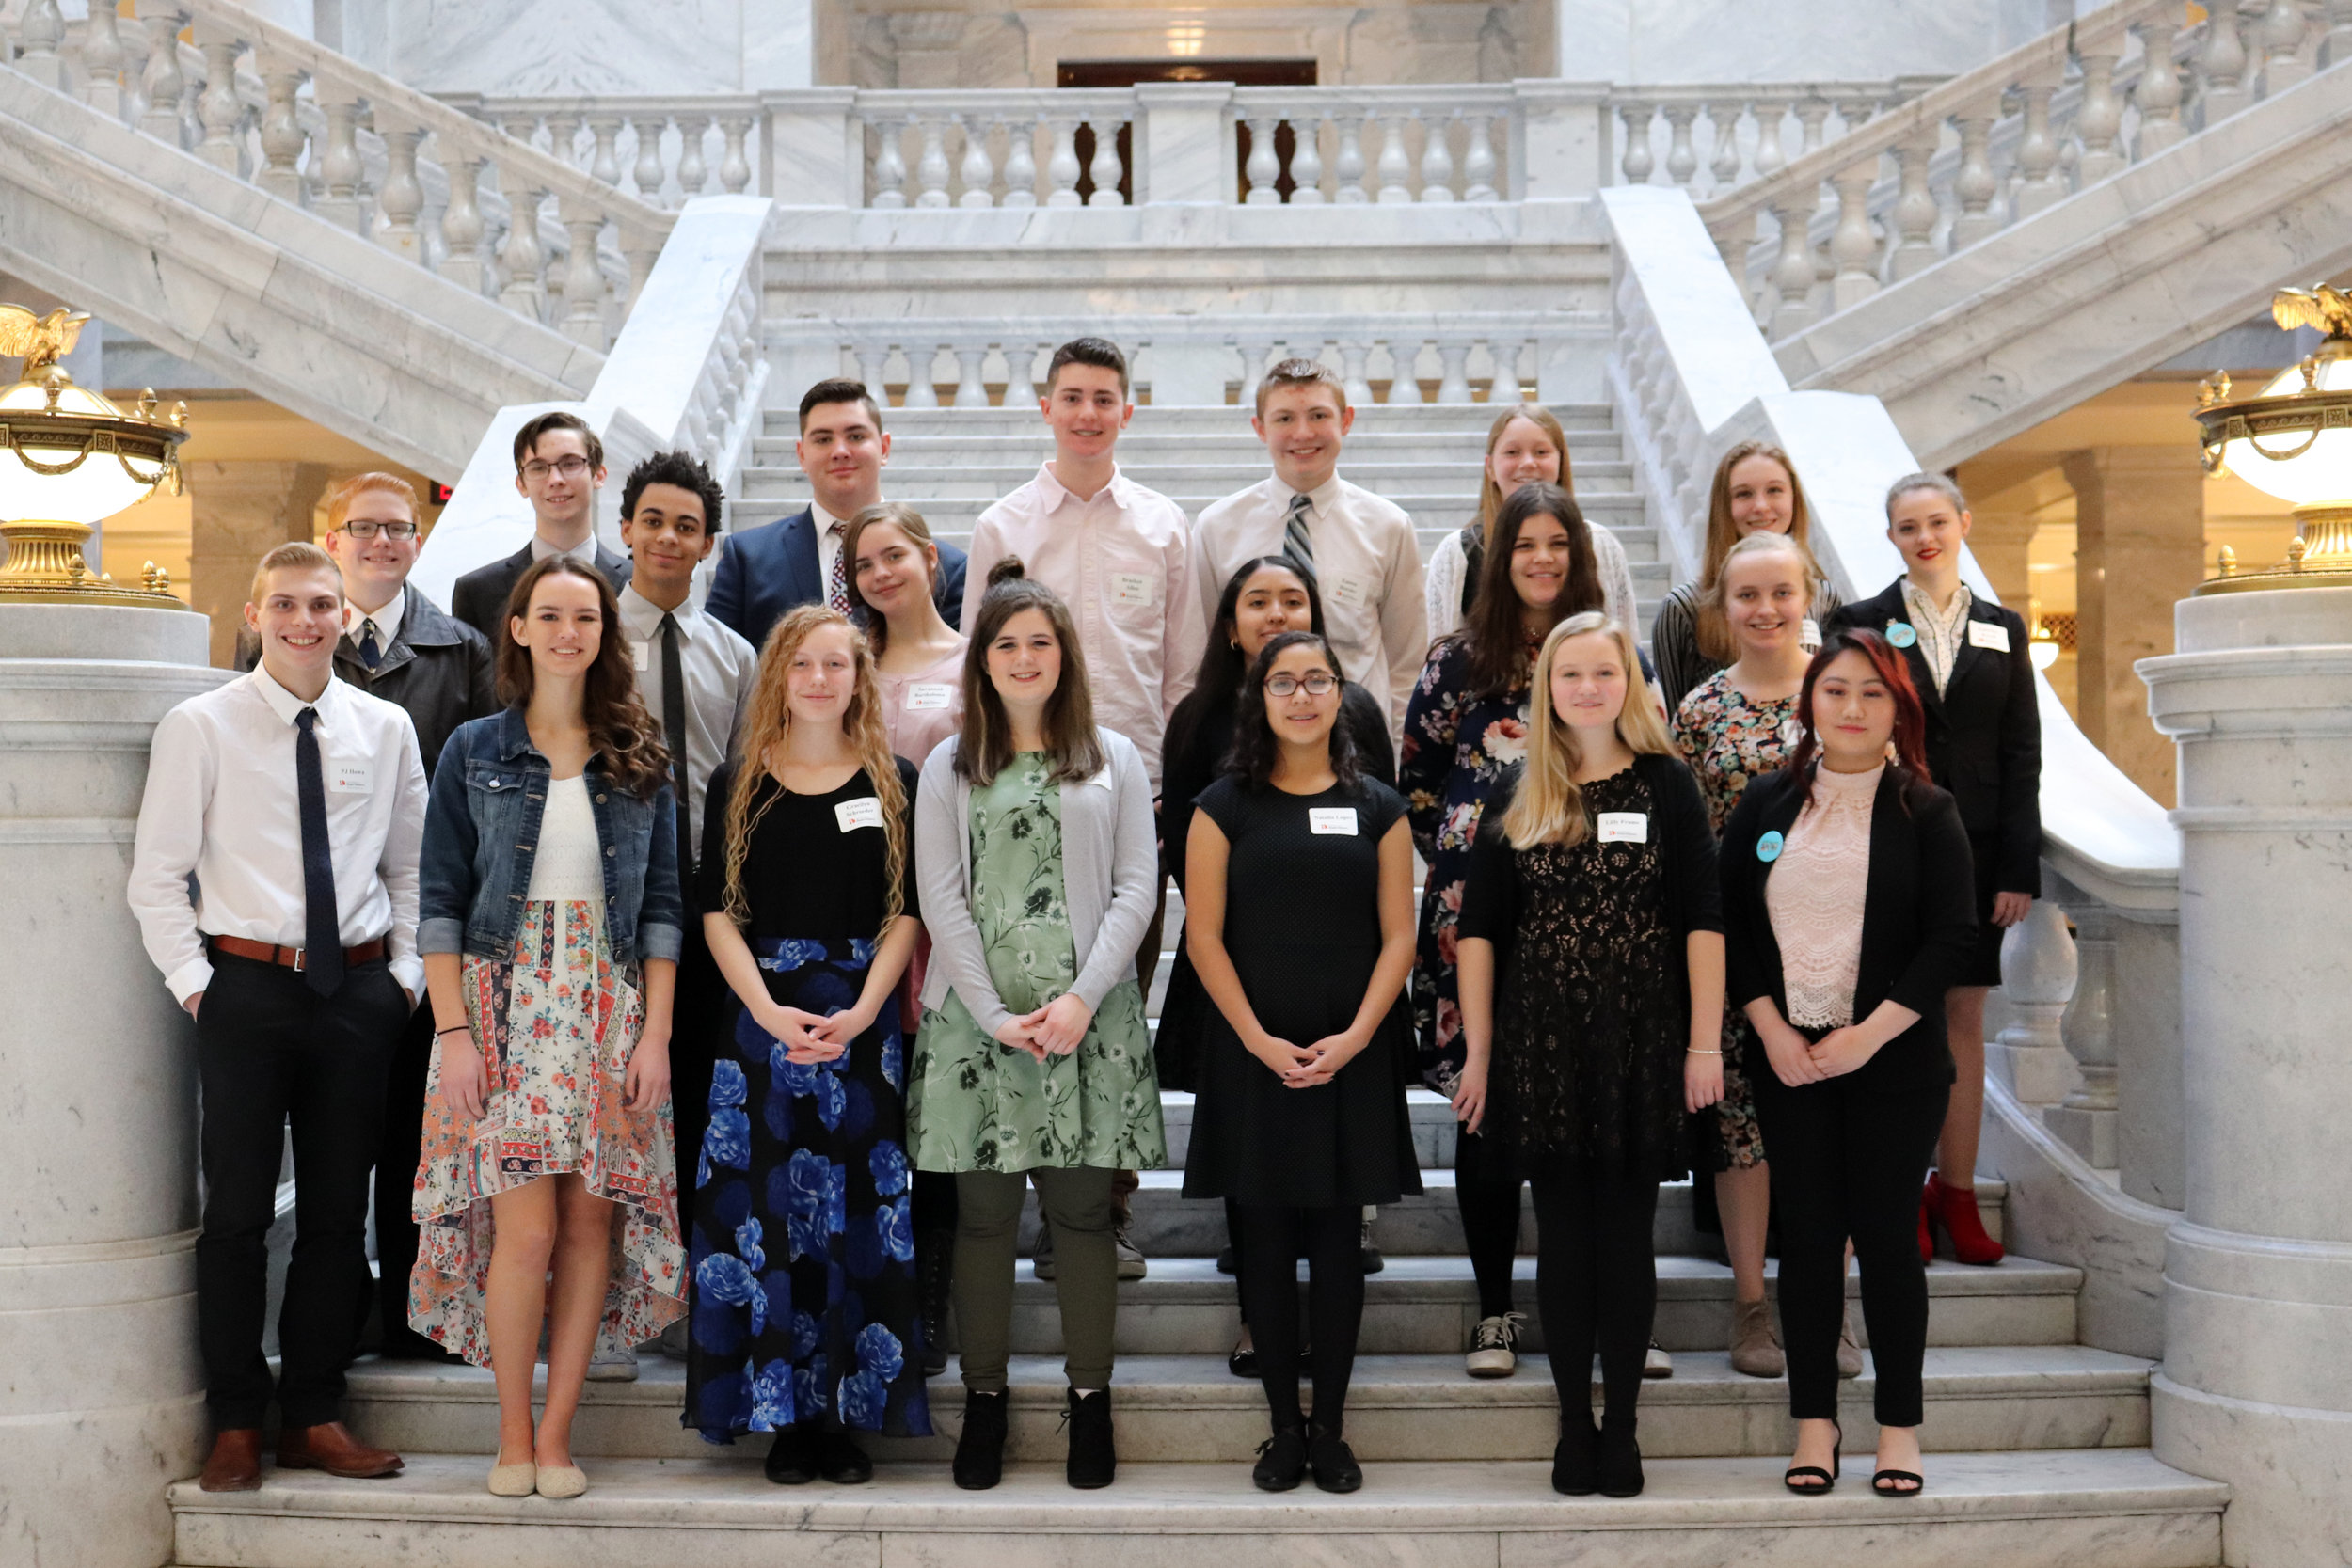 On the interior steps of the Capitol, students gather for a group photo.